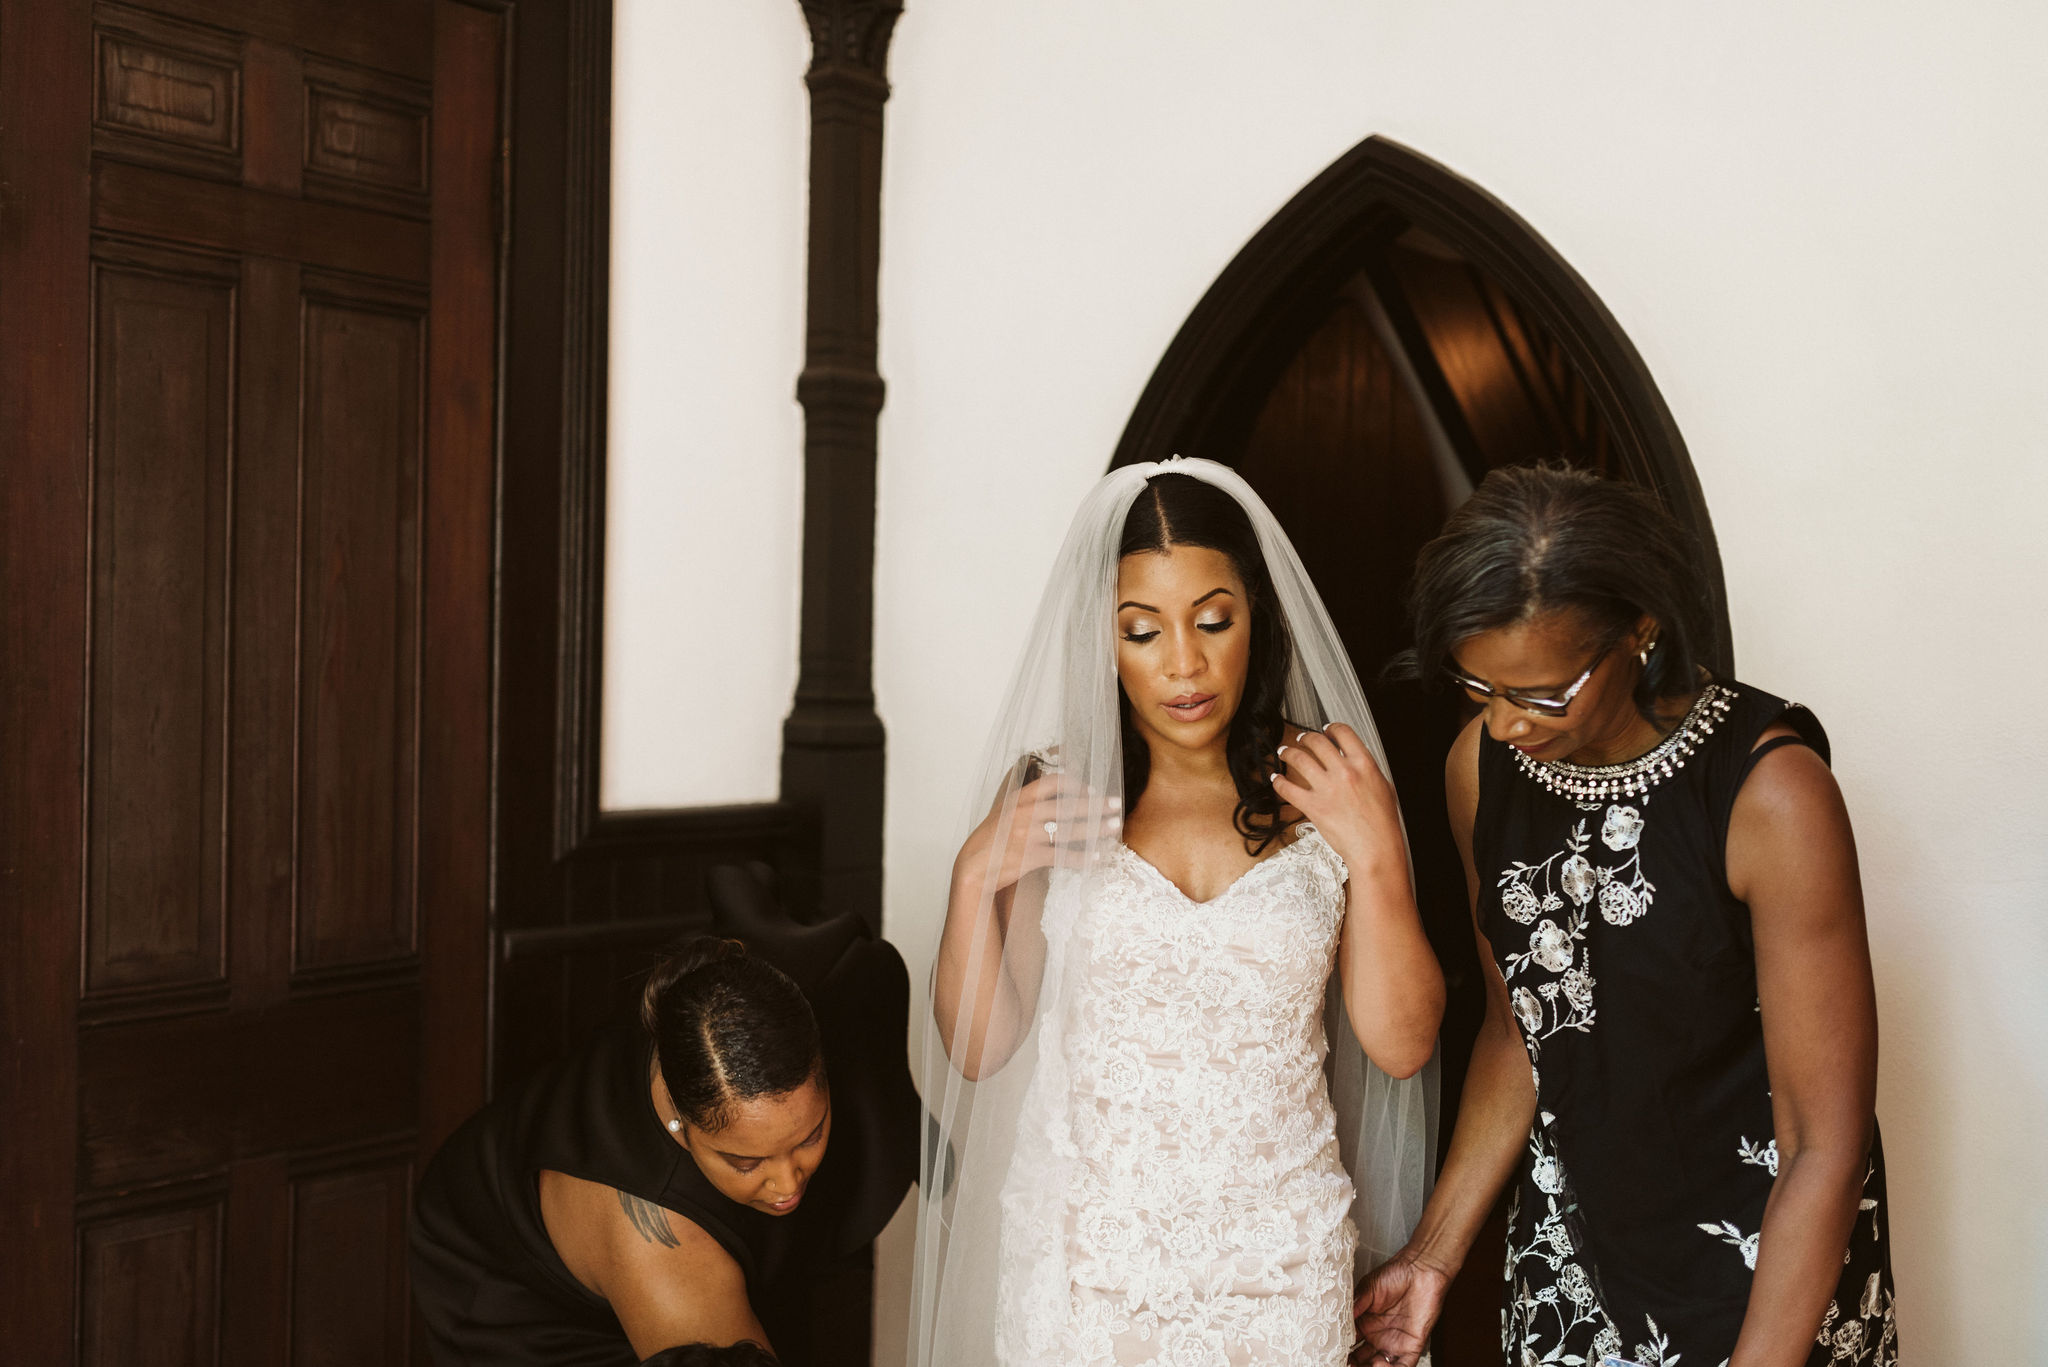  Baltimore, Maryland Wedding Photographer, Mount Vernon, Chase Court, Classic, Outdoor Ceremony, Garden, Romantic, Lace Wedding Dress with Long Veil, Bride Getting Ready Before Ceremony 